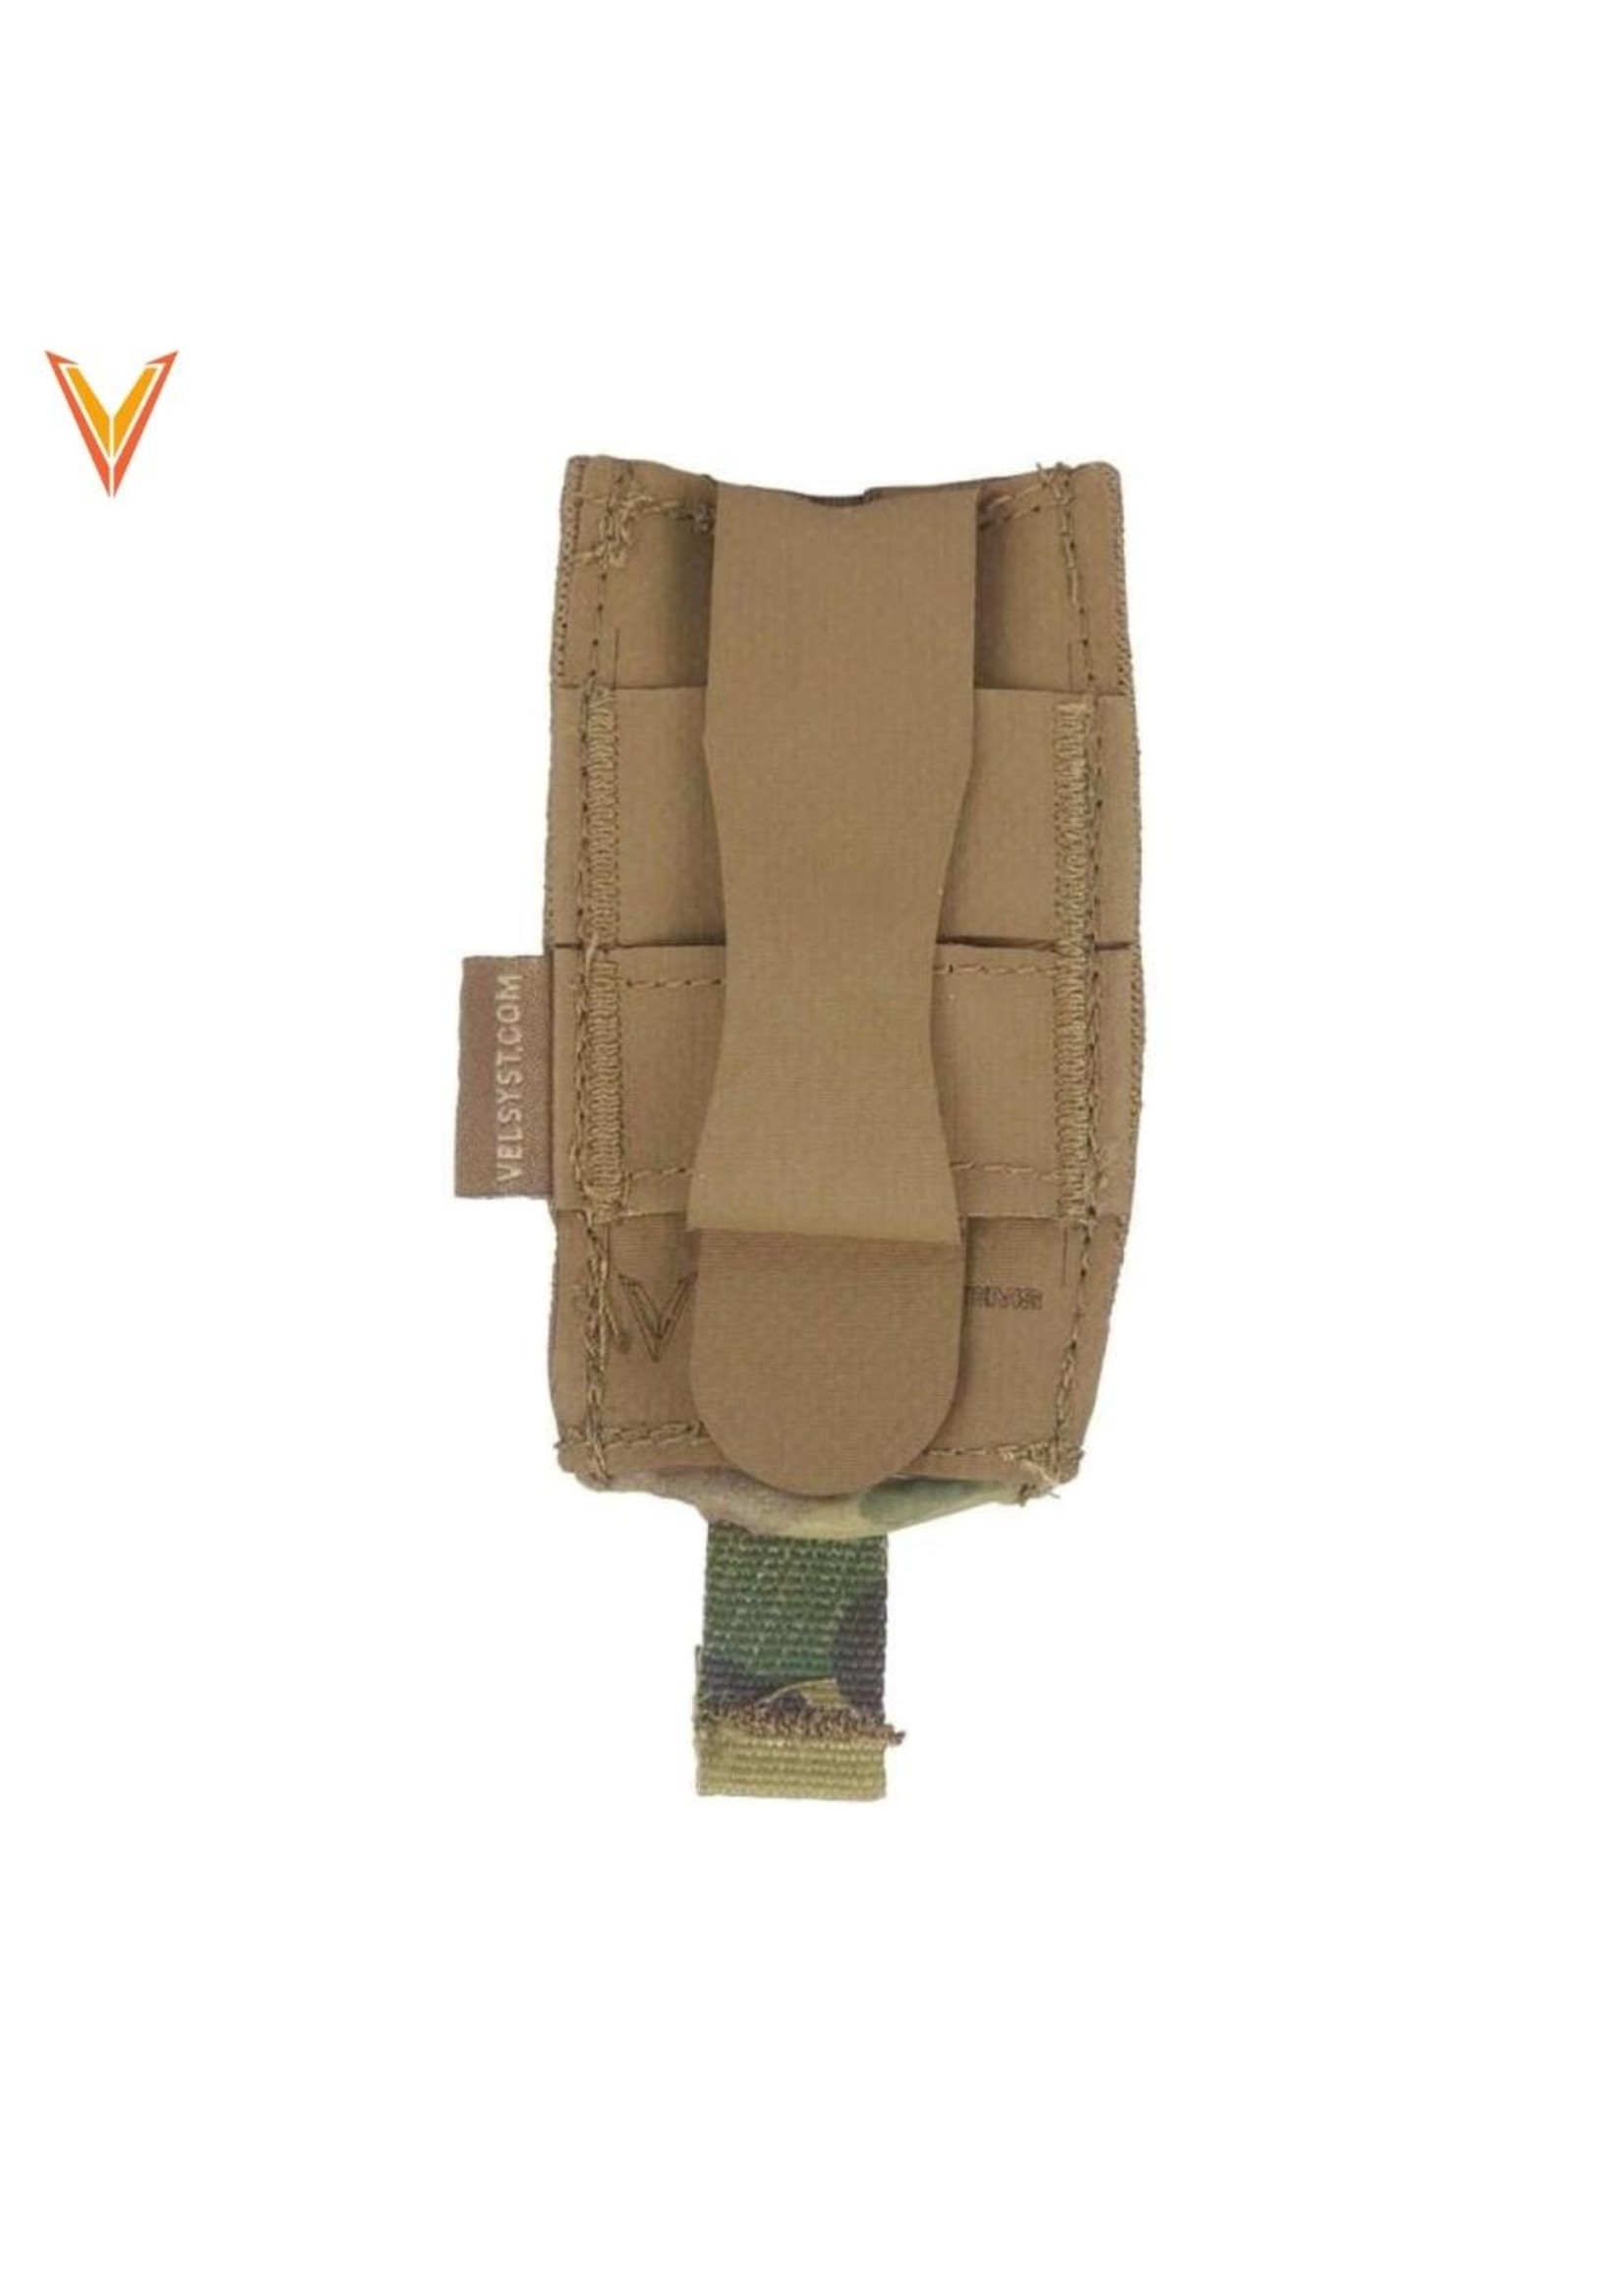 VELOCITY SYSTEMS HELIUM WHISPER MICRO DIDDIE POUCH